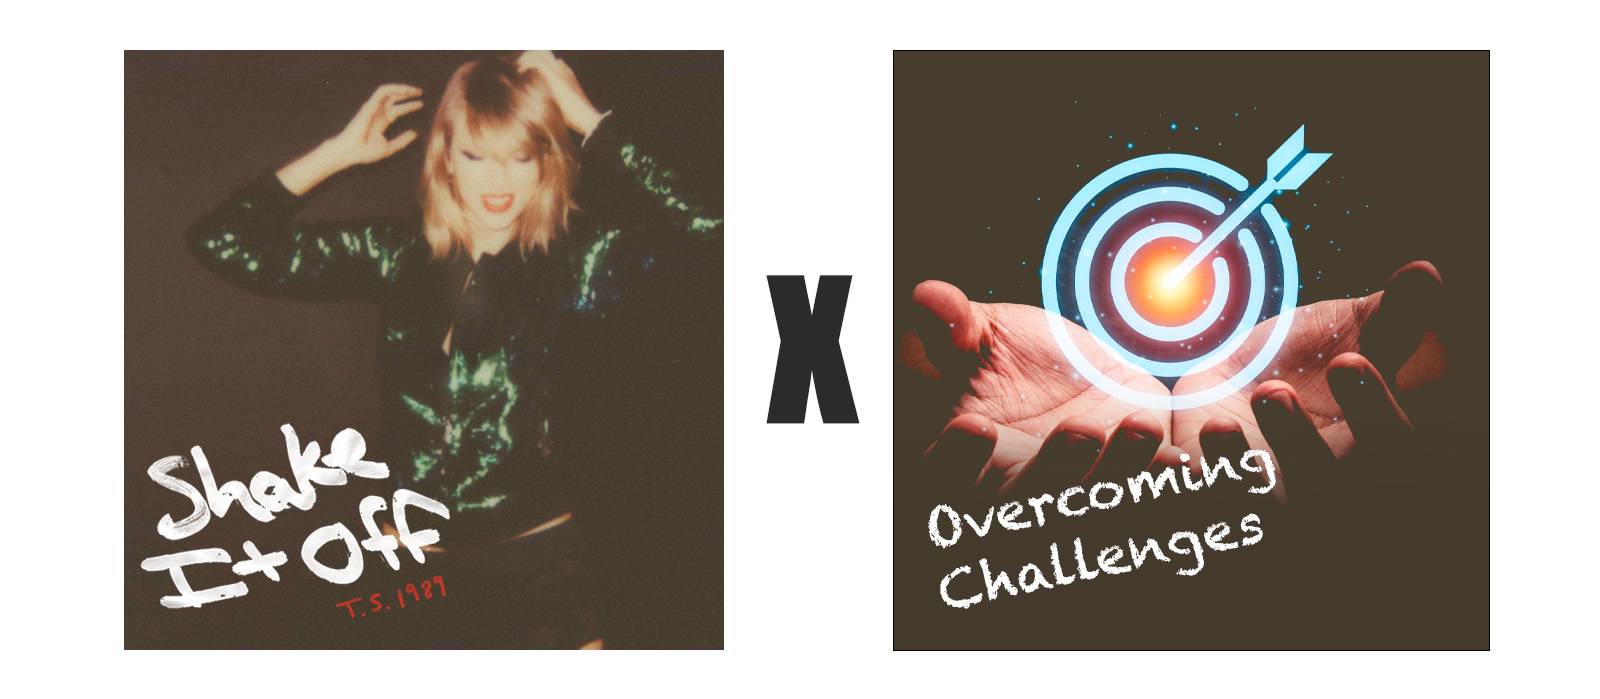 Taylor Swift Shake It Off x Overcoming Challenges